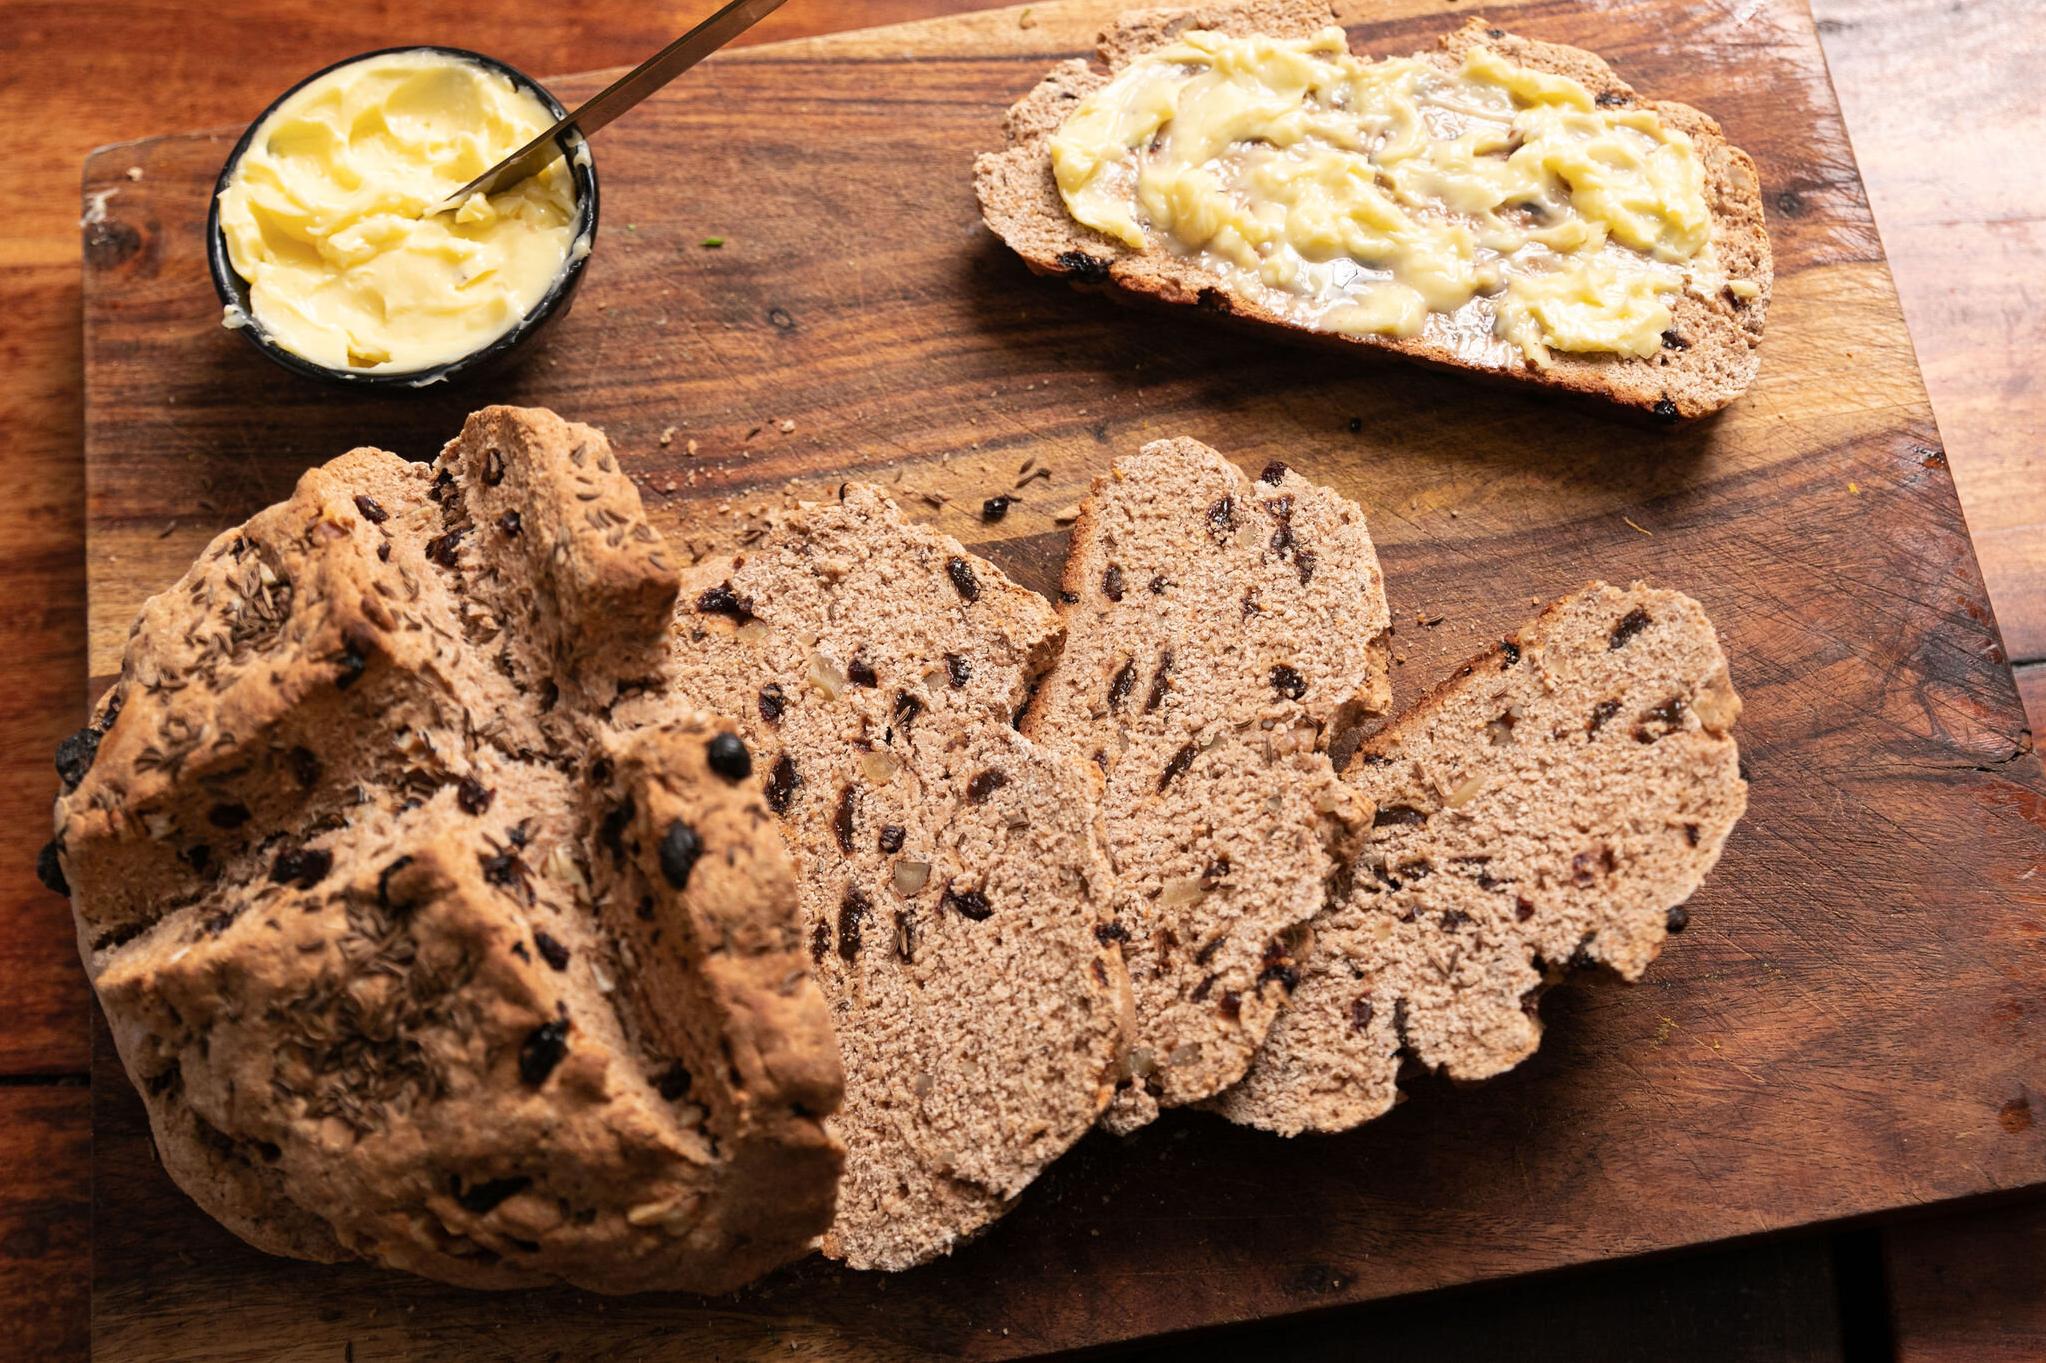  Nothing beats a classic soda bread recipe with a hint of Irish whiskey goodness.